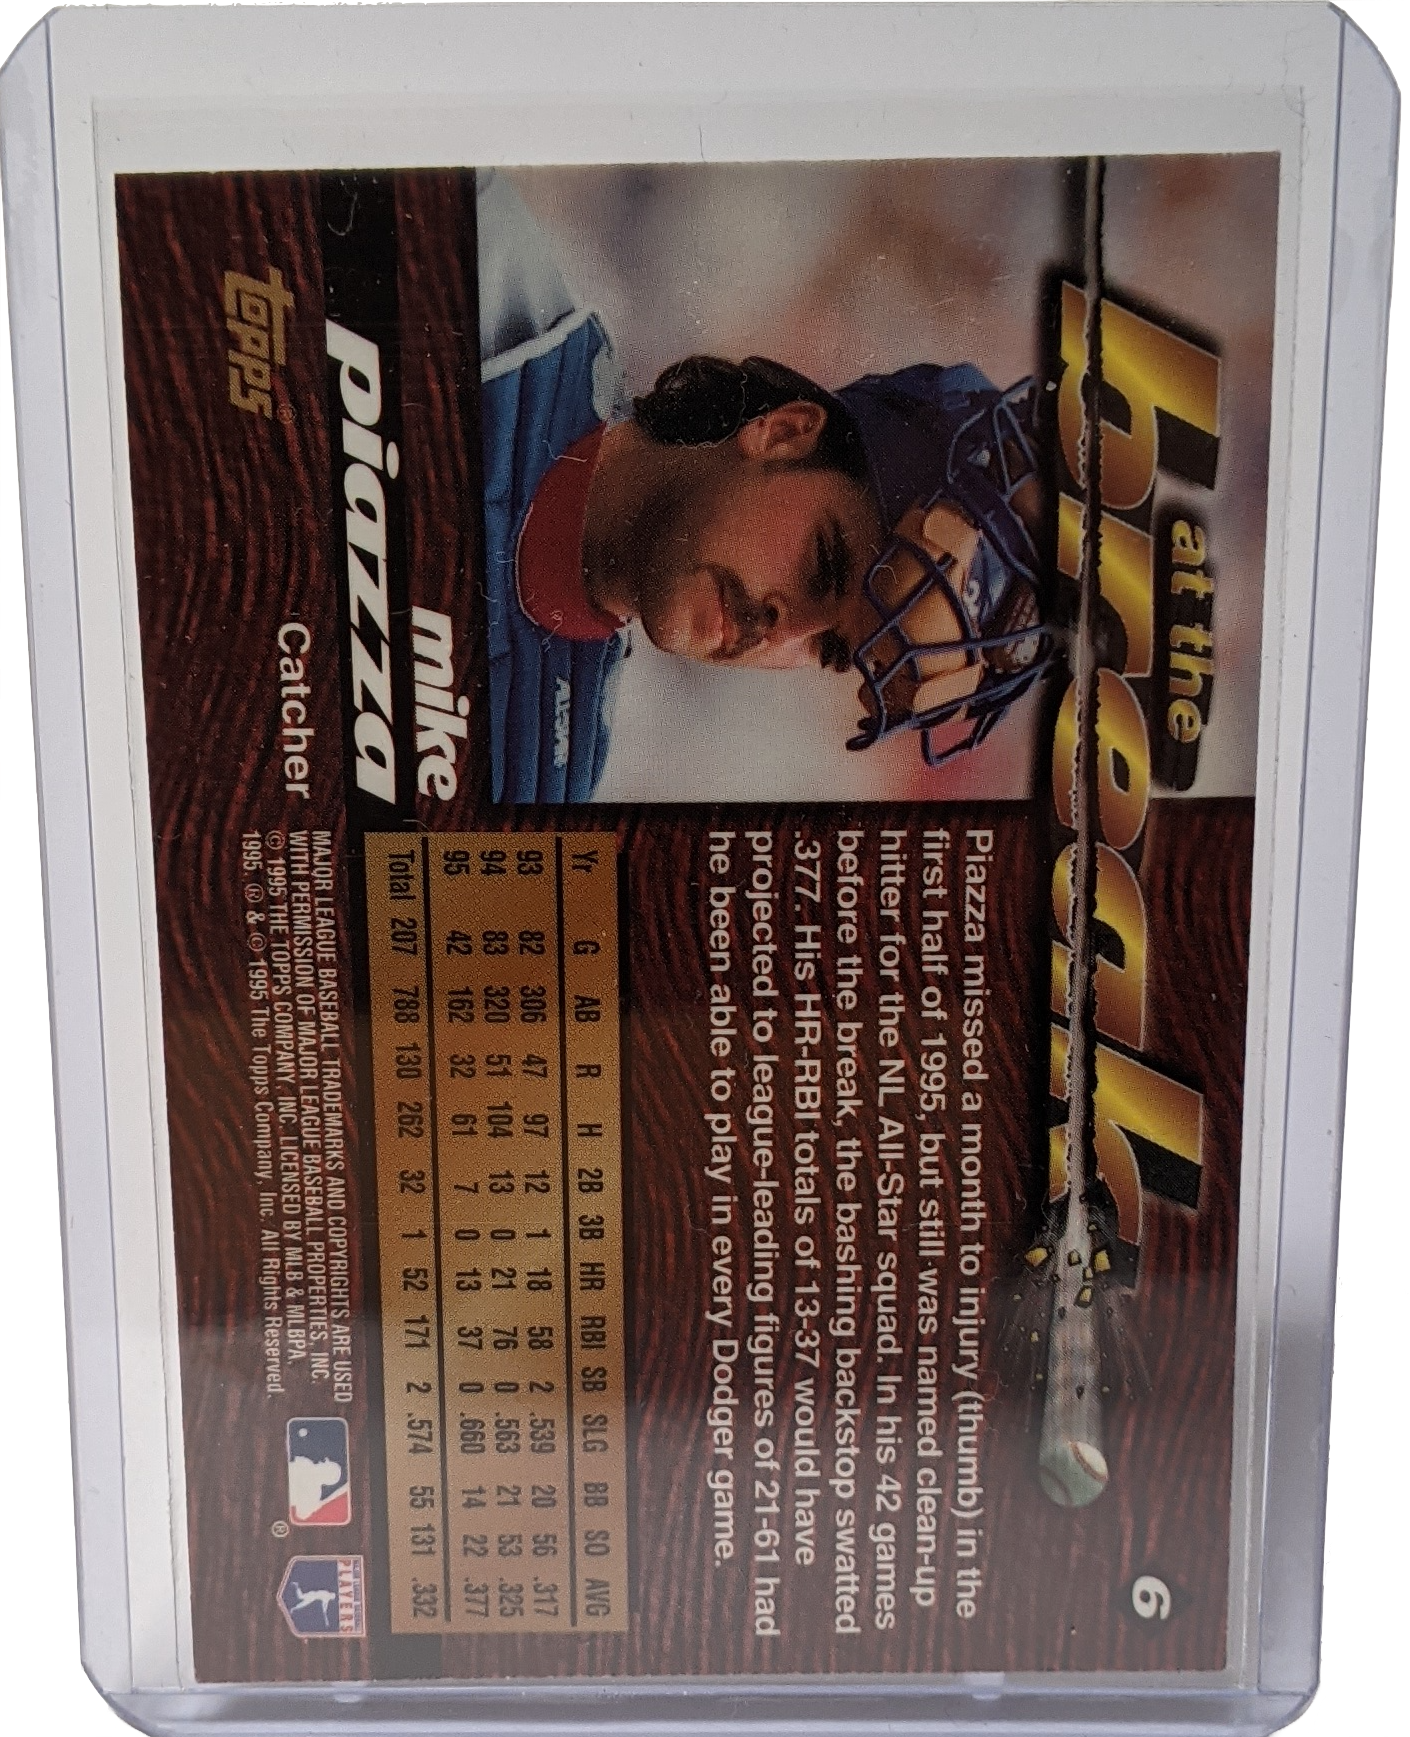 1995 Topps Traded Mike Piazza - Power Booster at the Break